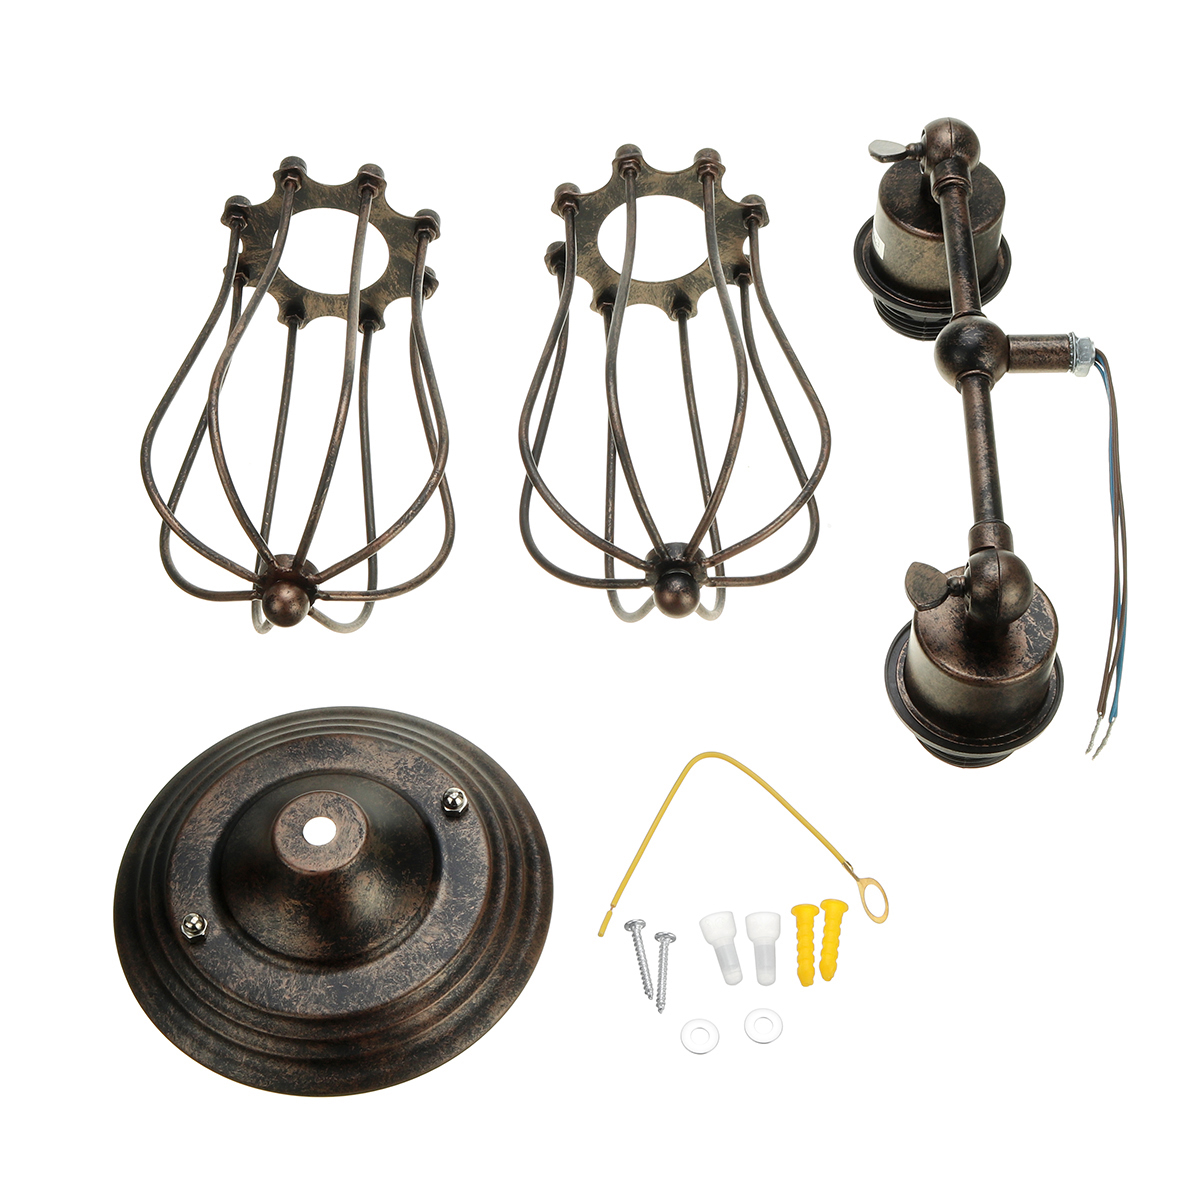 Vintage-Industrial-Wall-mounted-Metal-Cage-Wall-Sconce-Lampshade-Light-Shade-Without-Bulb-1721820-6